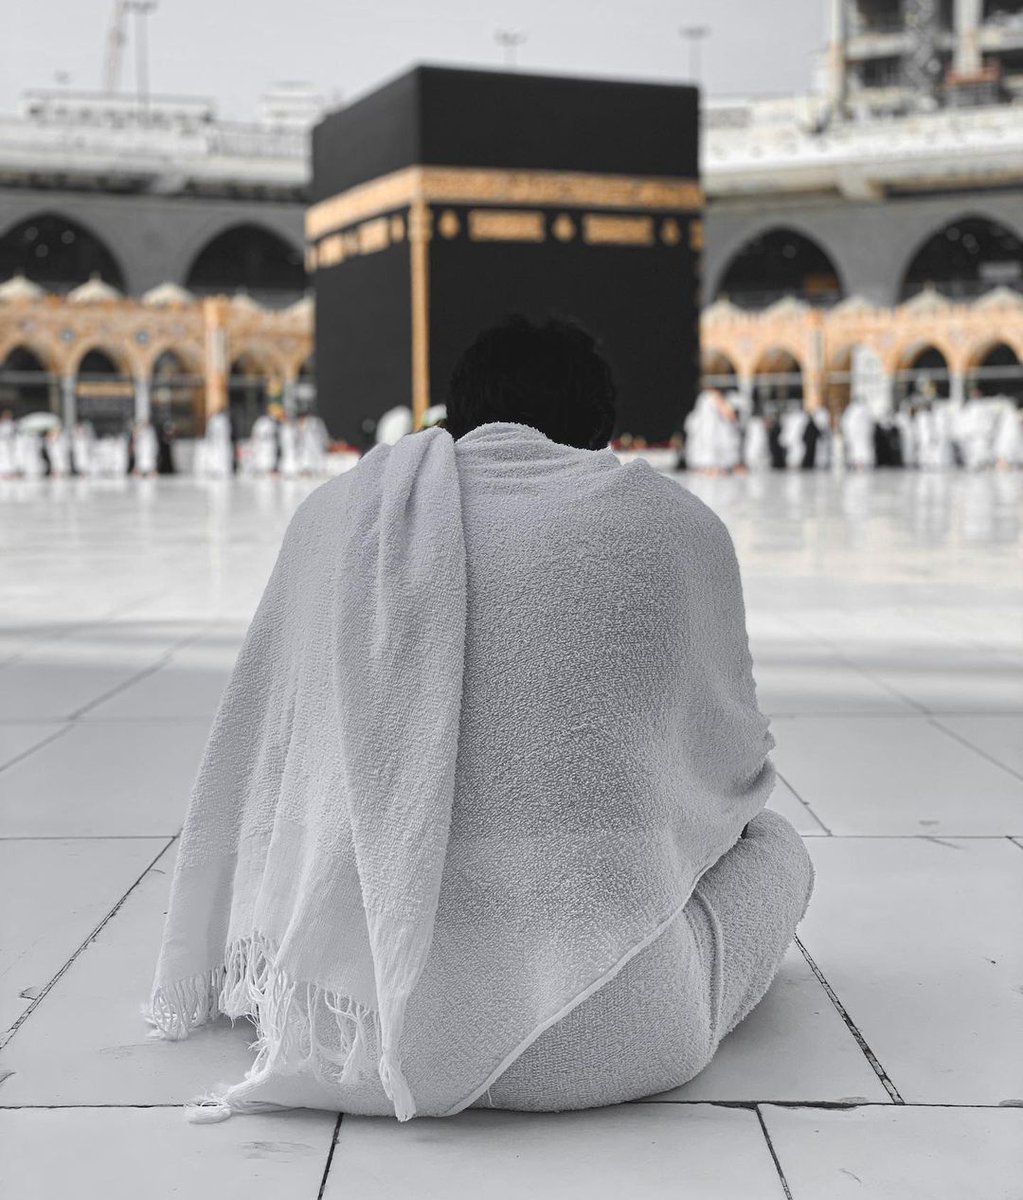 “I just wanna sit infront of ka’aba and cry my heart out.”